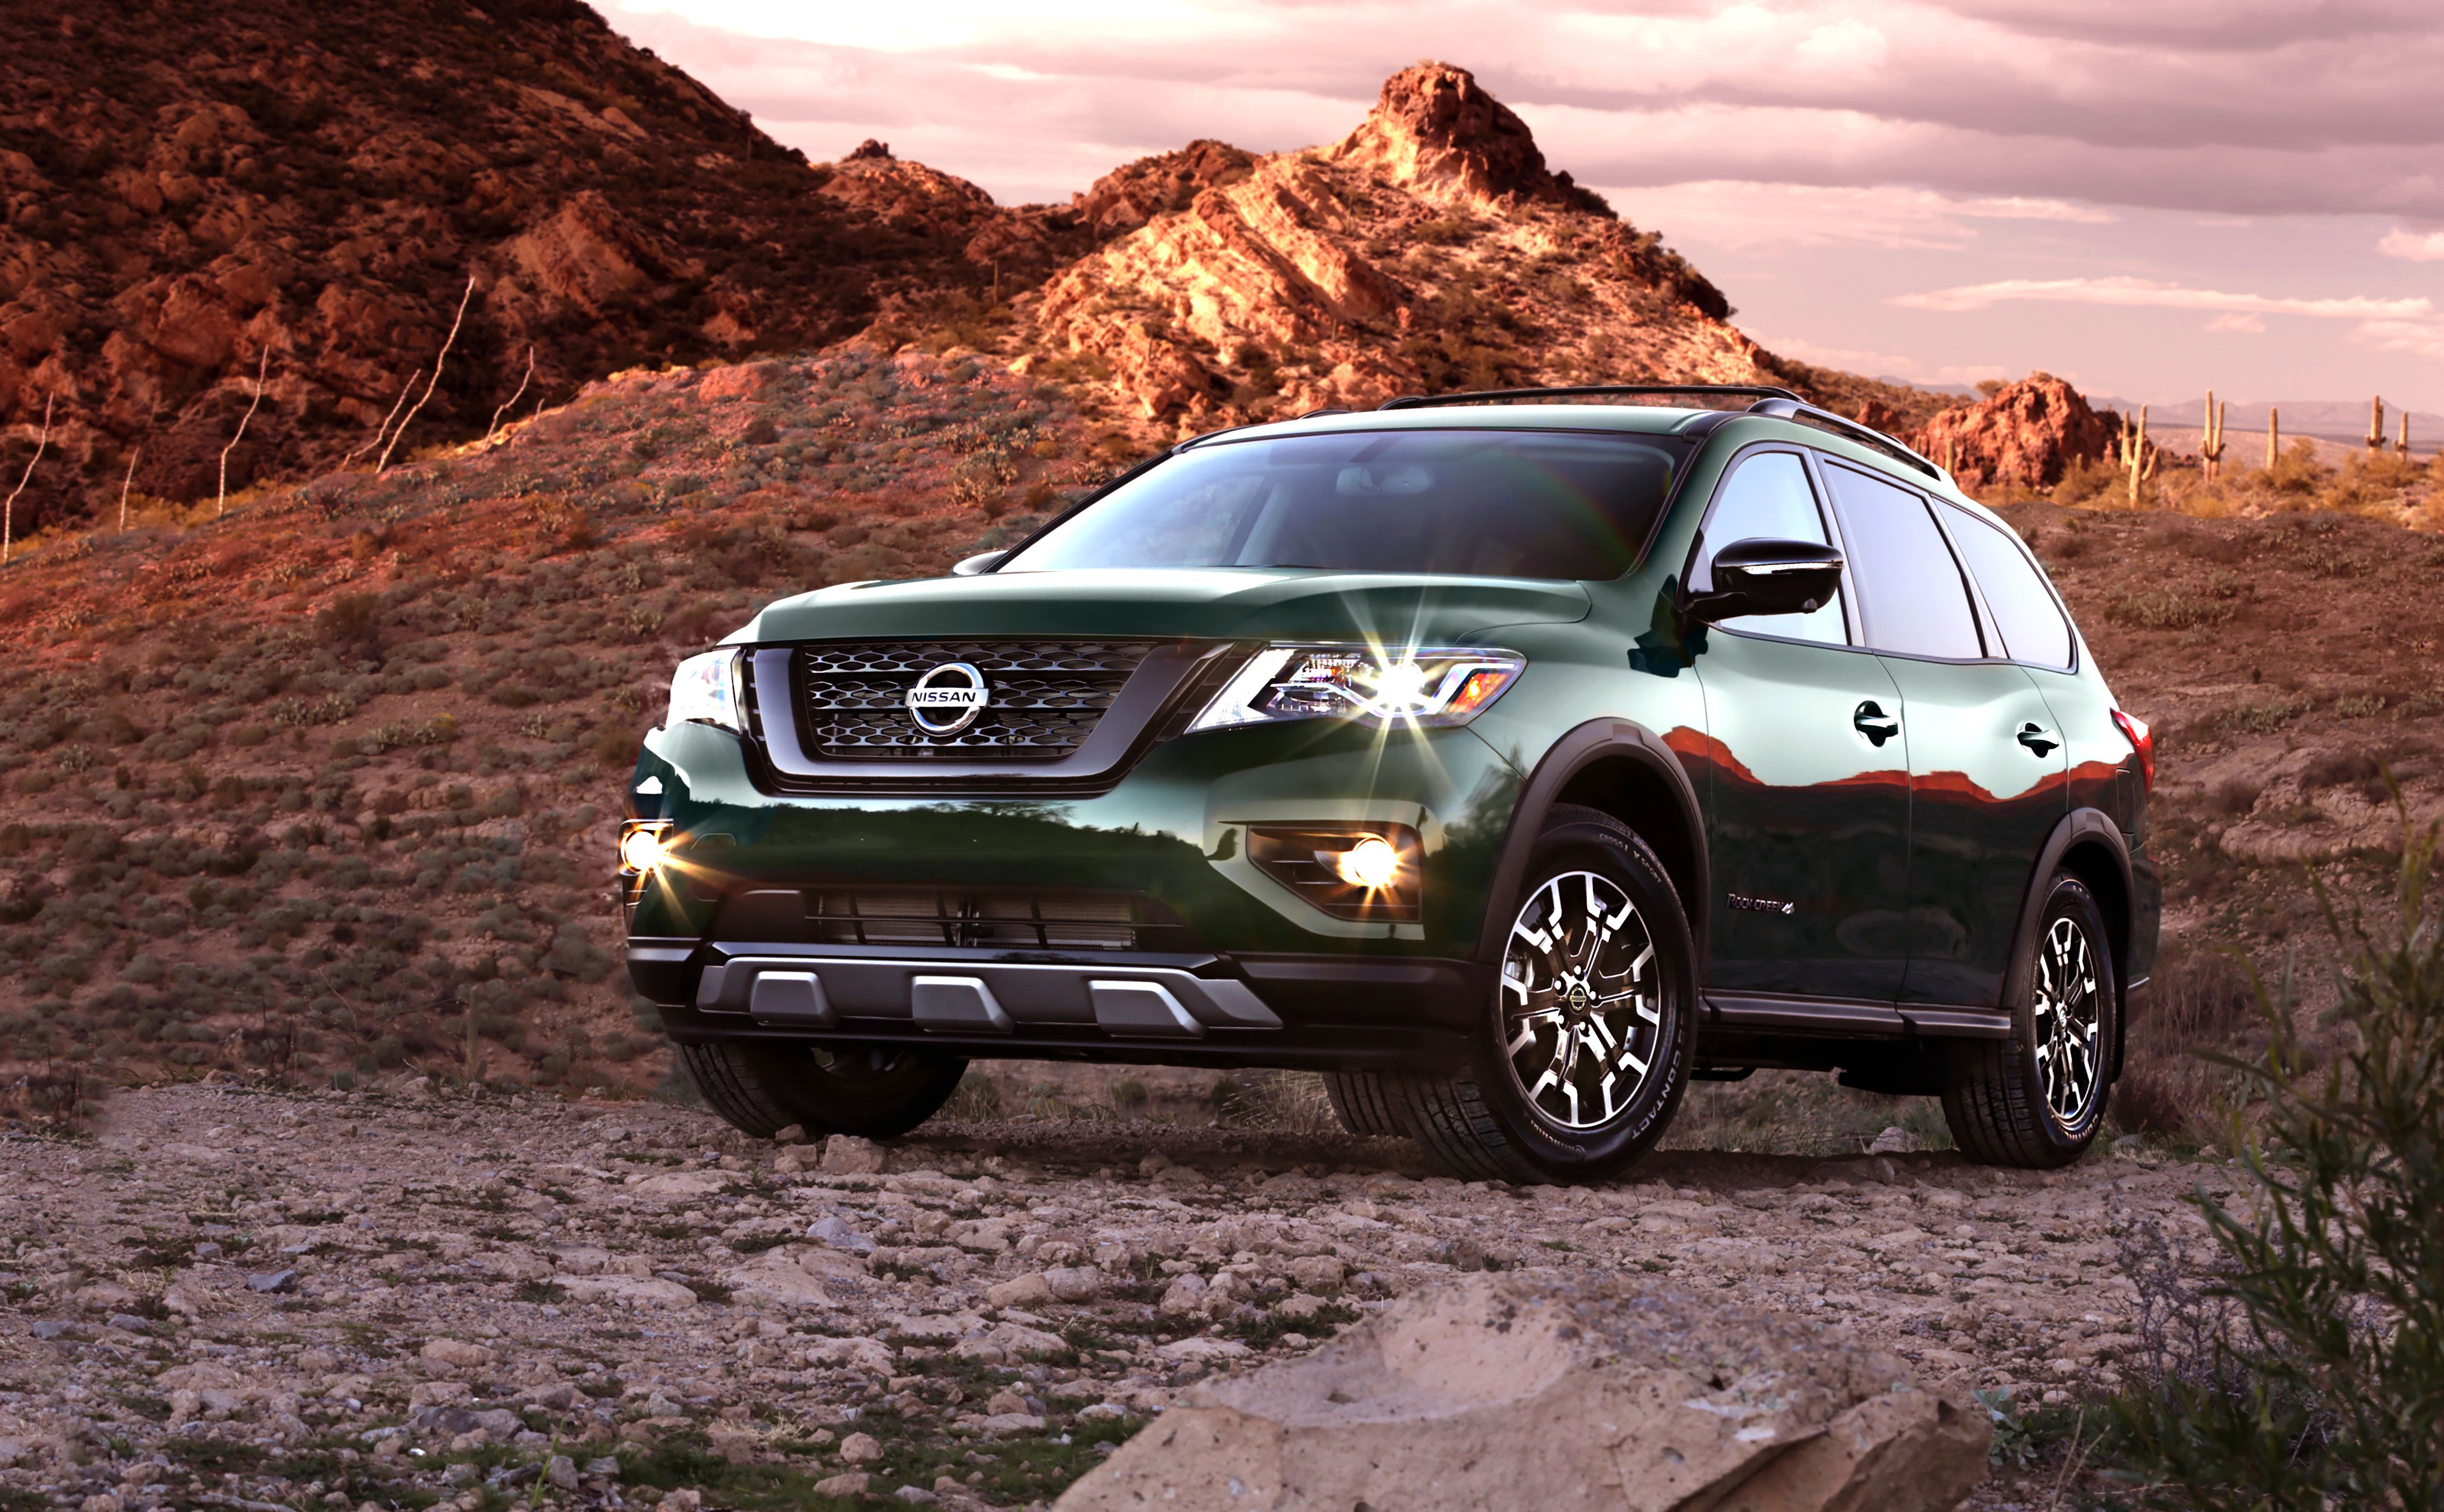 Nissan Adds Off-Road Looks To The Pathfinder with the Rock Creek Edition Package